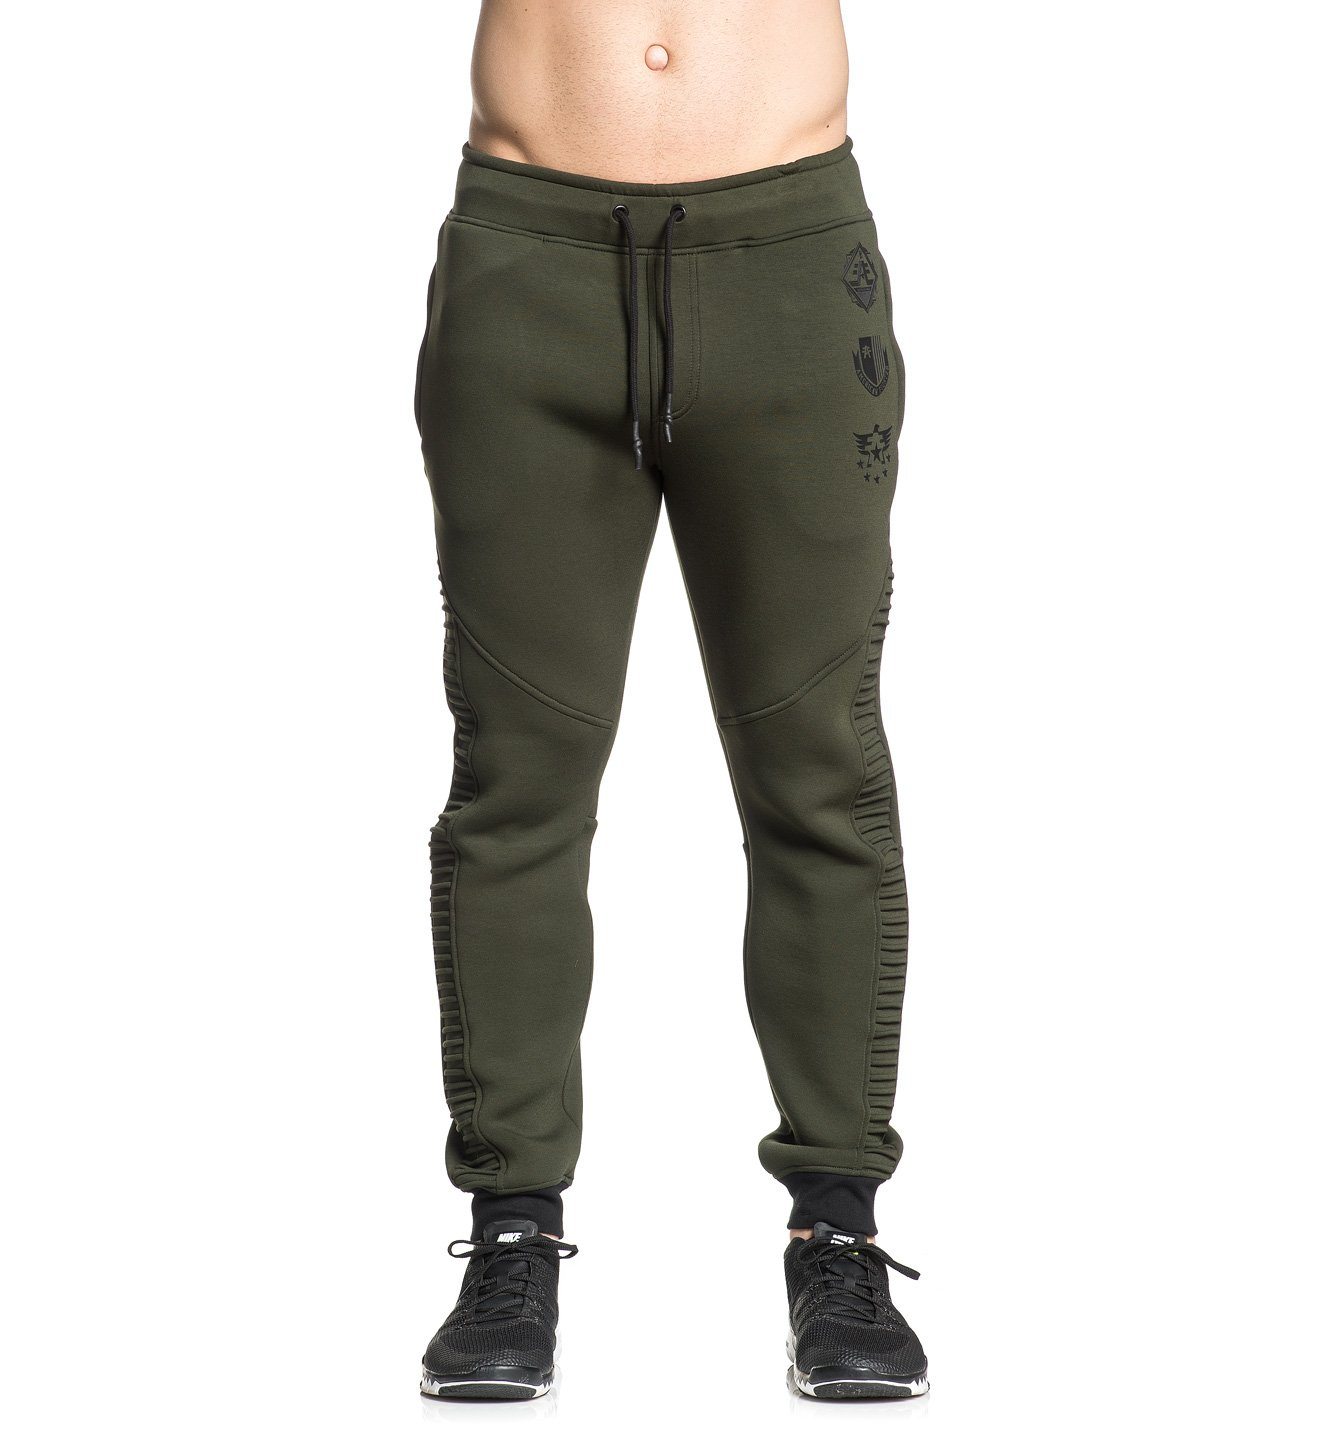 Proximity Jogger - Mens Bottoms - American Fighter